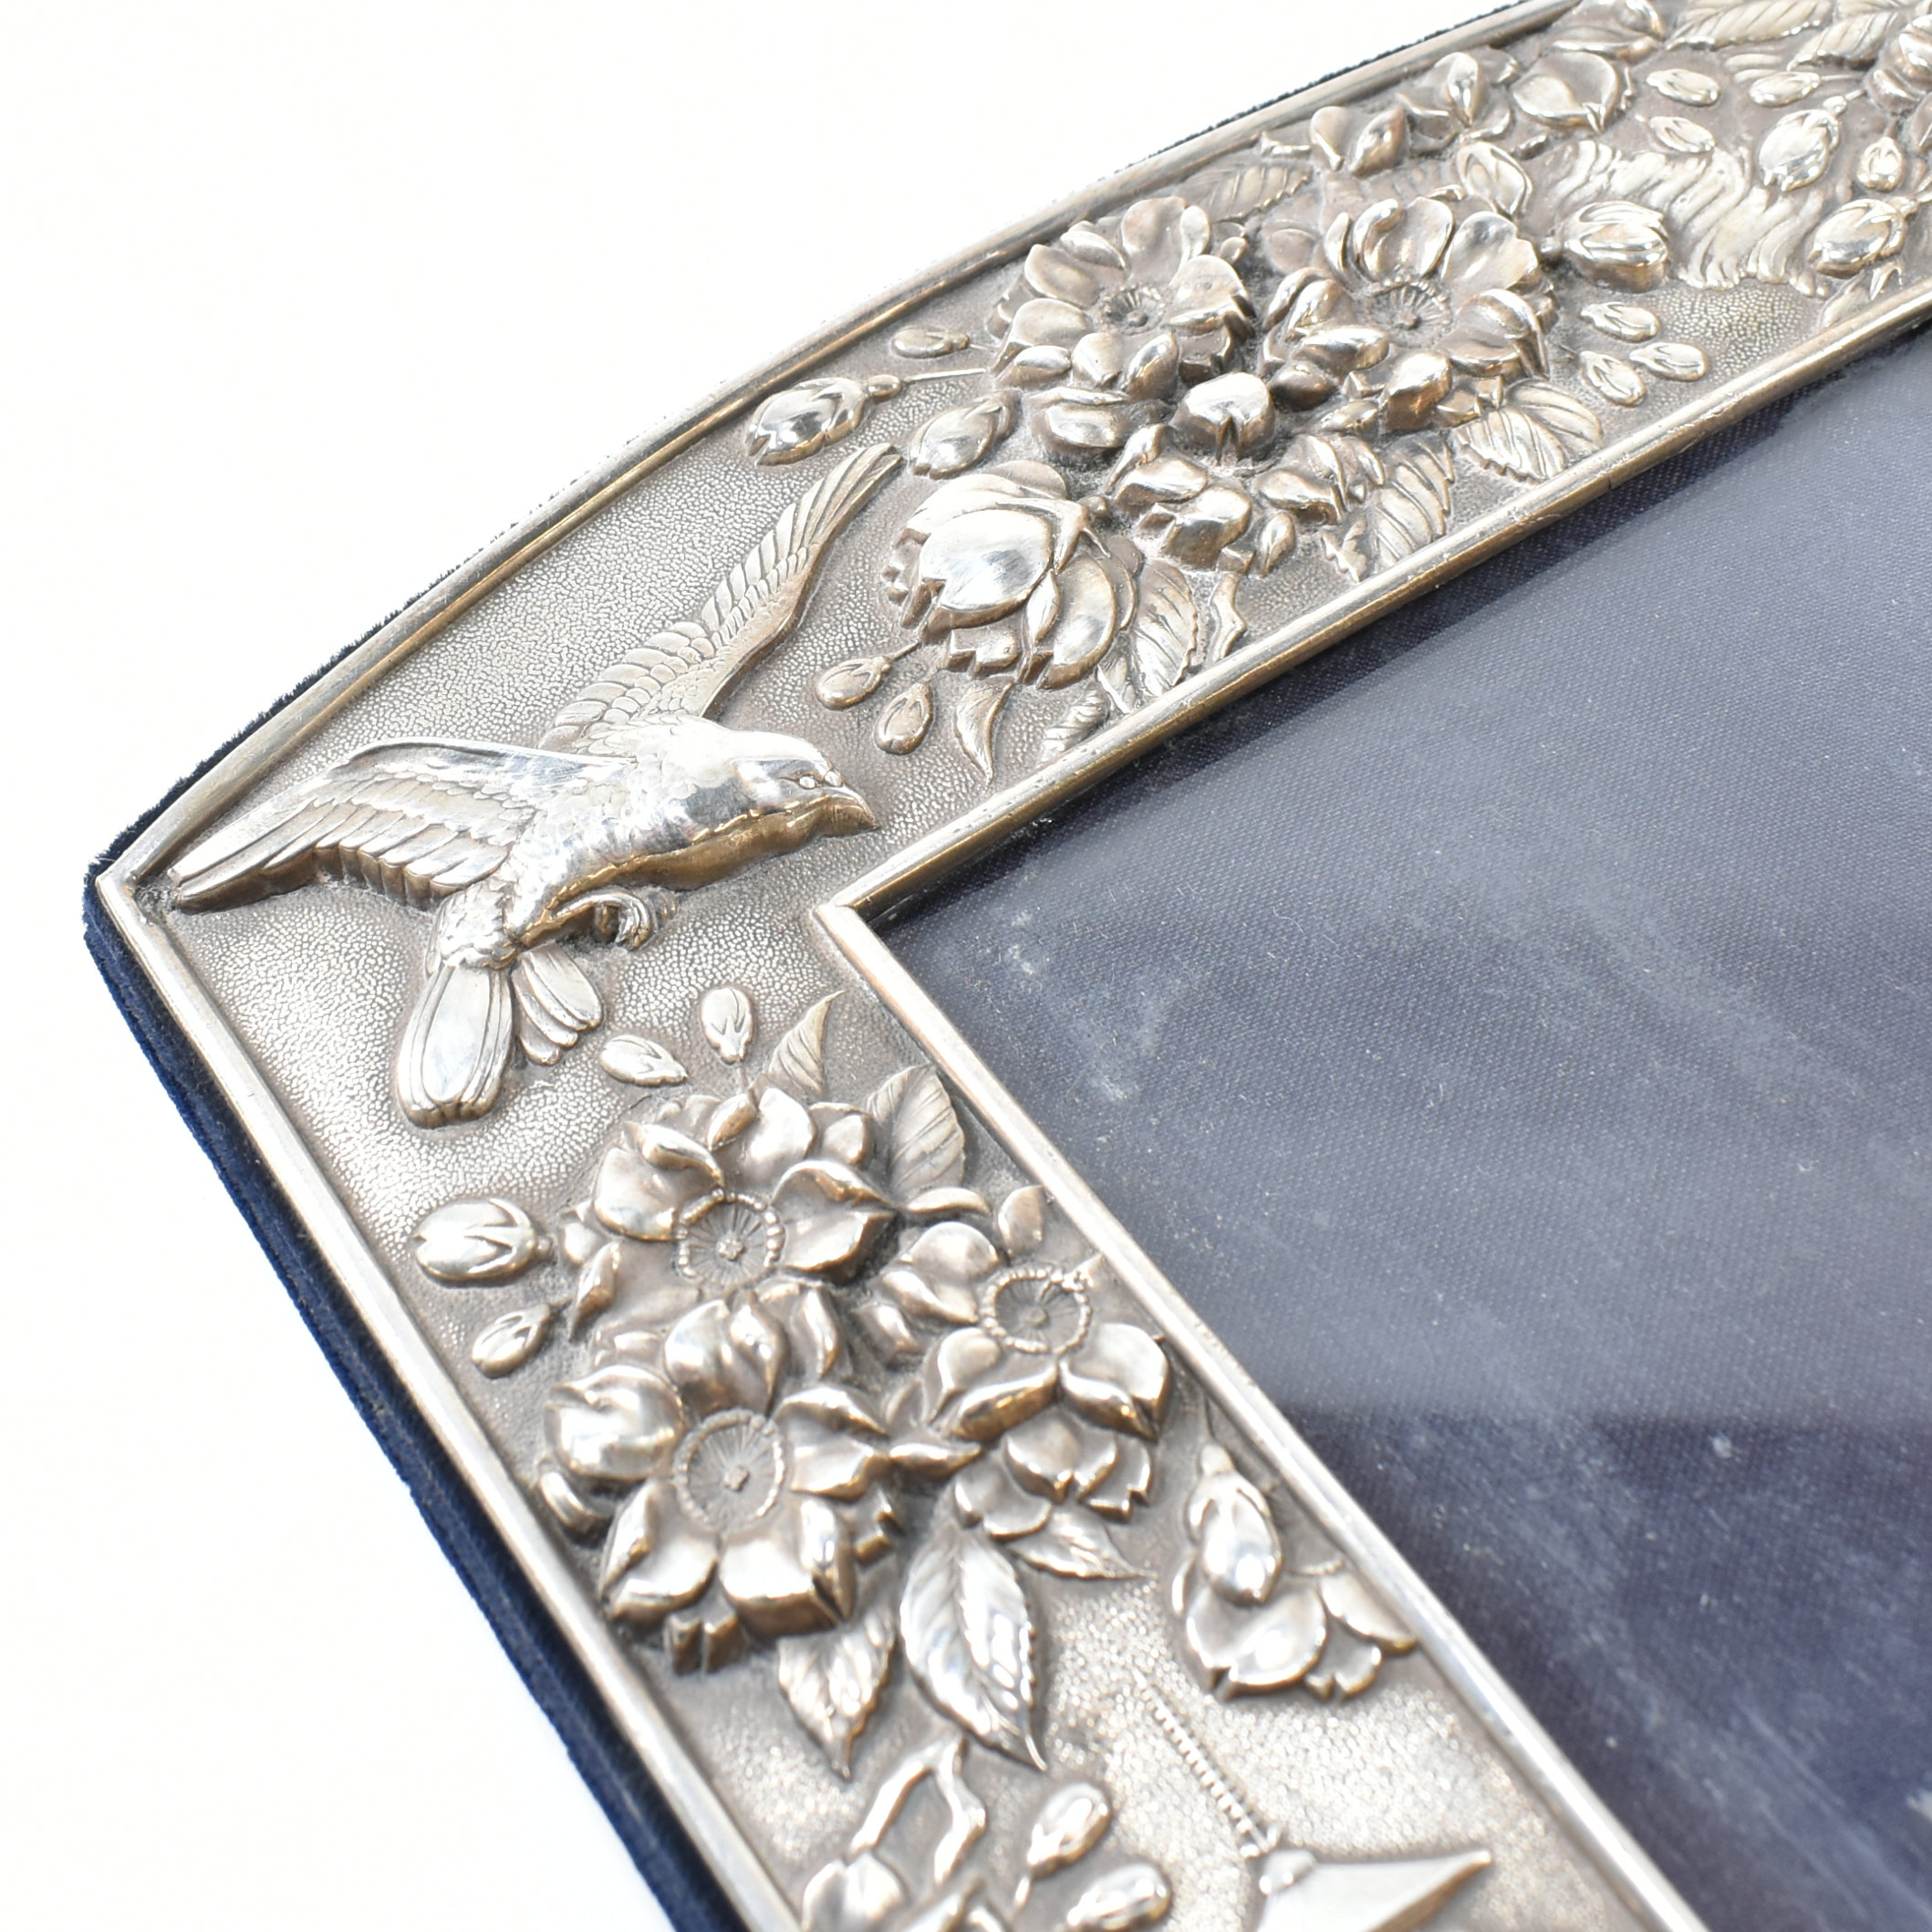 LATE 20TH CENTURY BRITANNIA SILVER MOUNTED PICTURE FRAME - Image 6 of 10